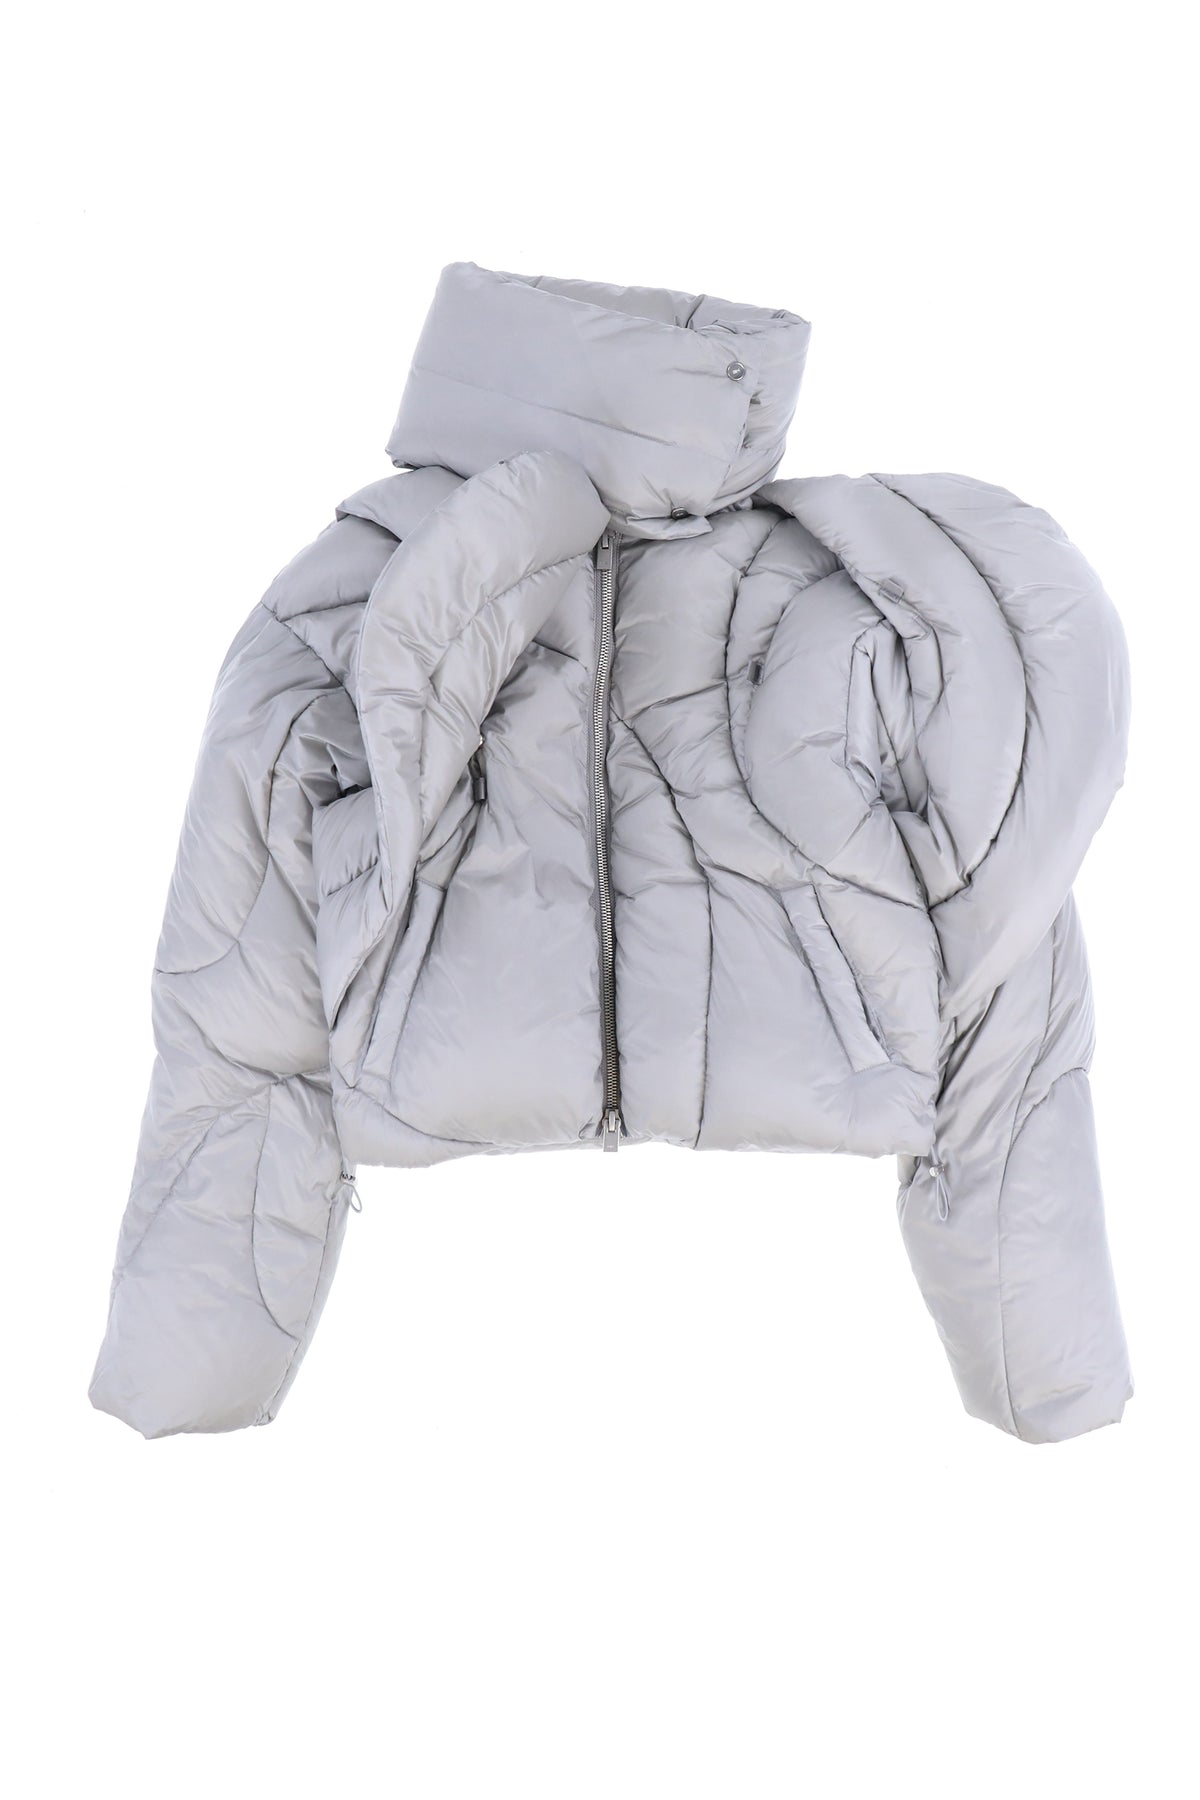 CONNECTIVE DOWN JACKET / GRY